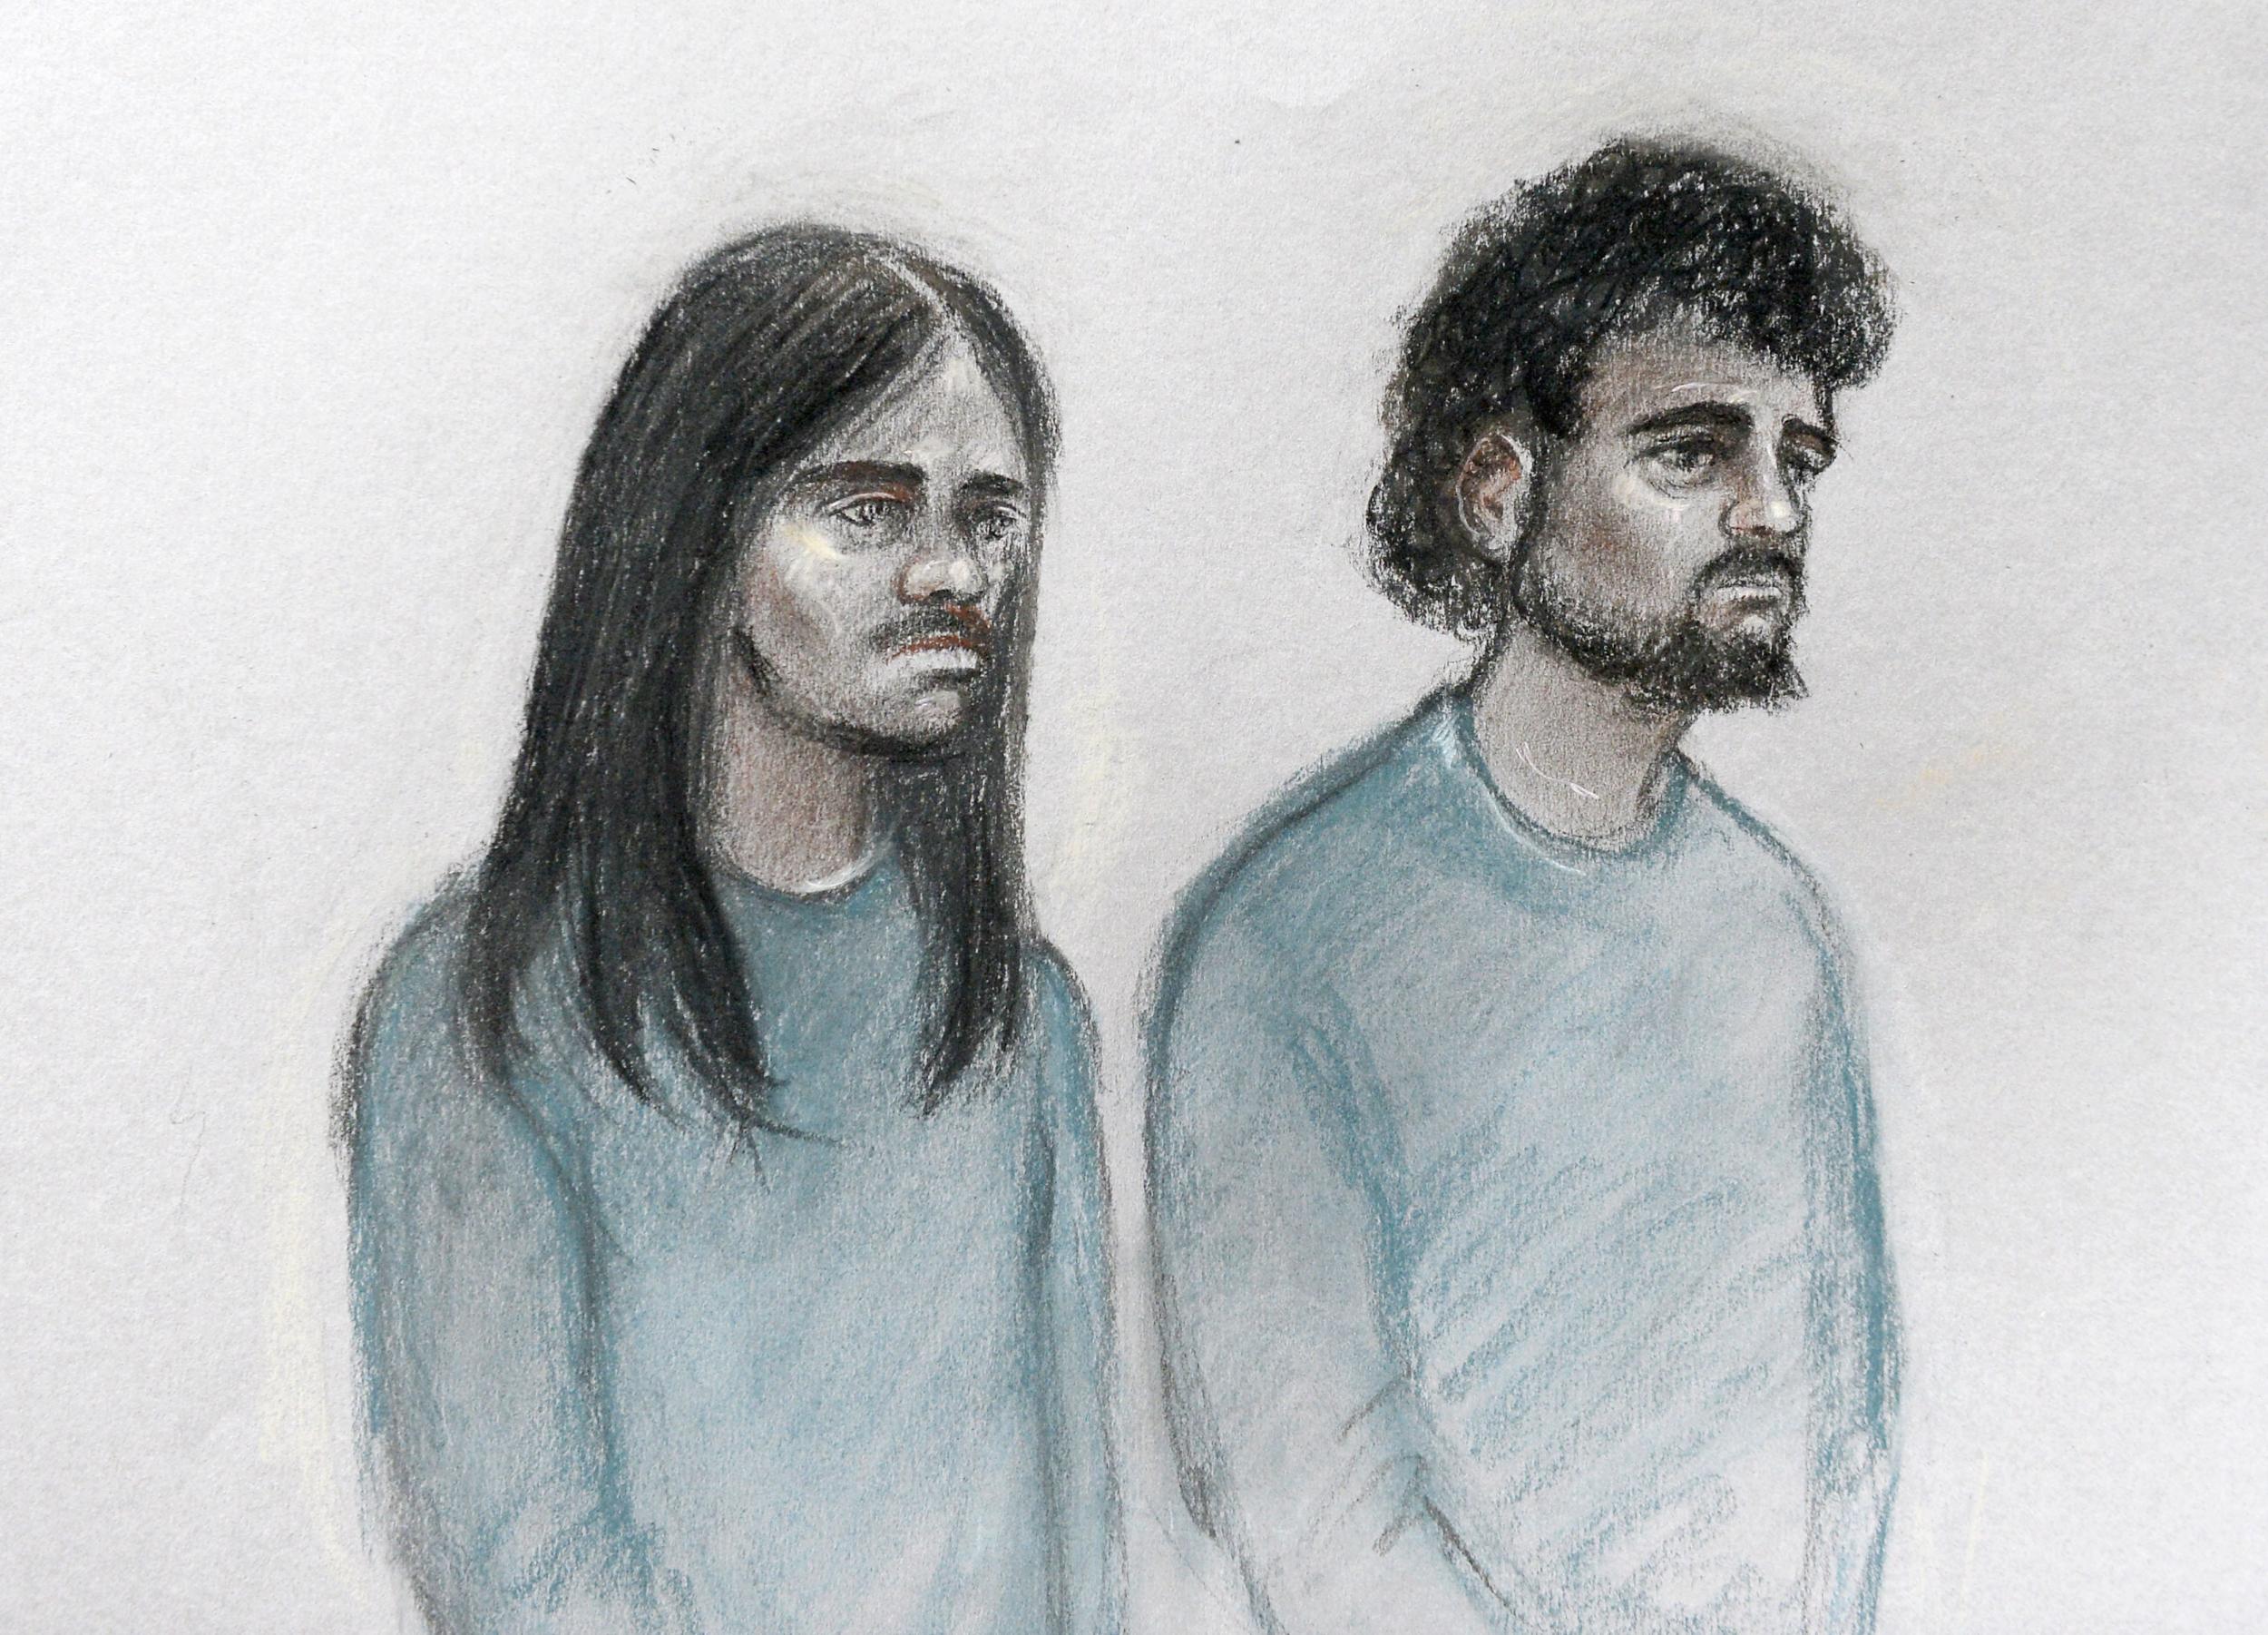 Naa'imur Zakariyah Rahman (left) allegedly planned to assassinate Theresa May and Mohammed Aqib Imran (right) allegedly helped in his plan to join Isis